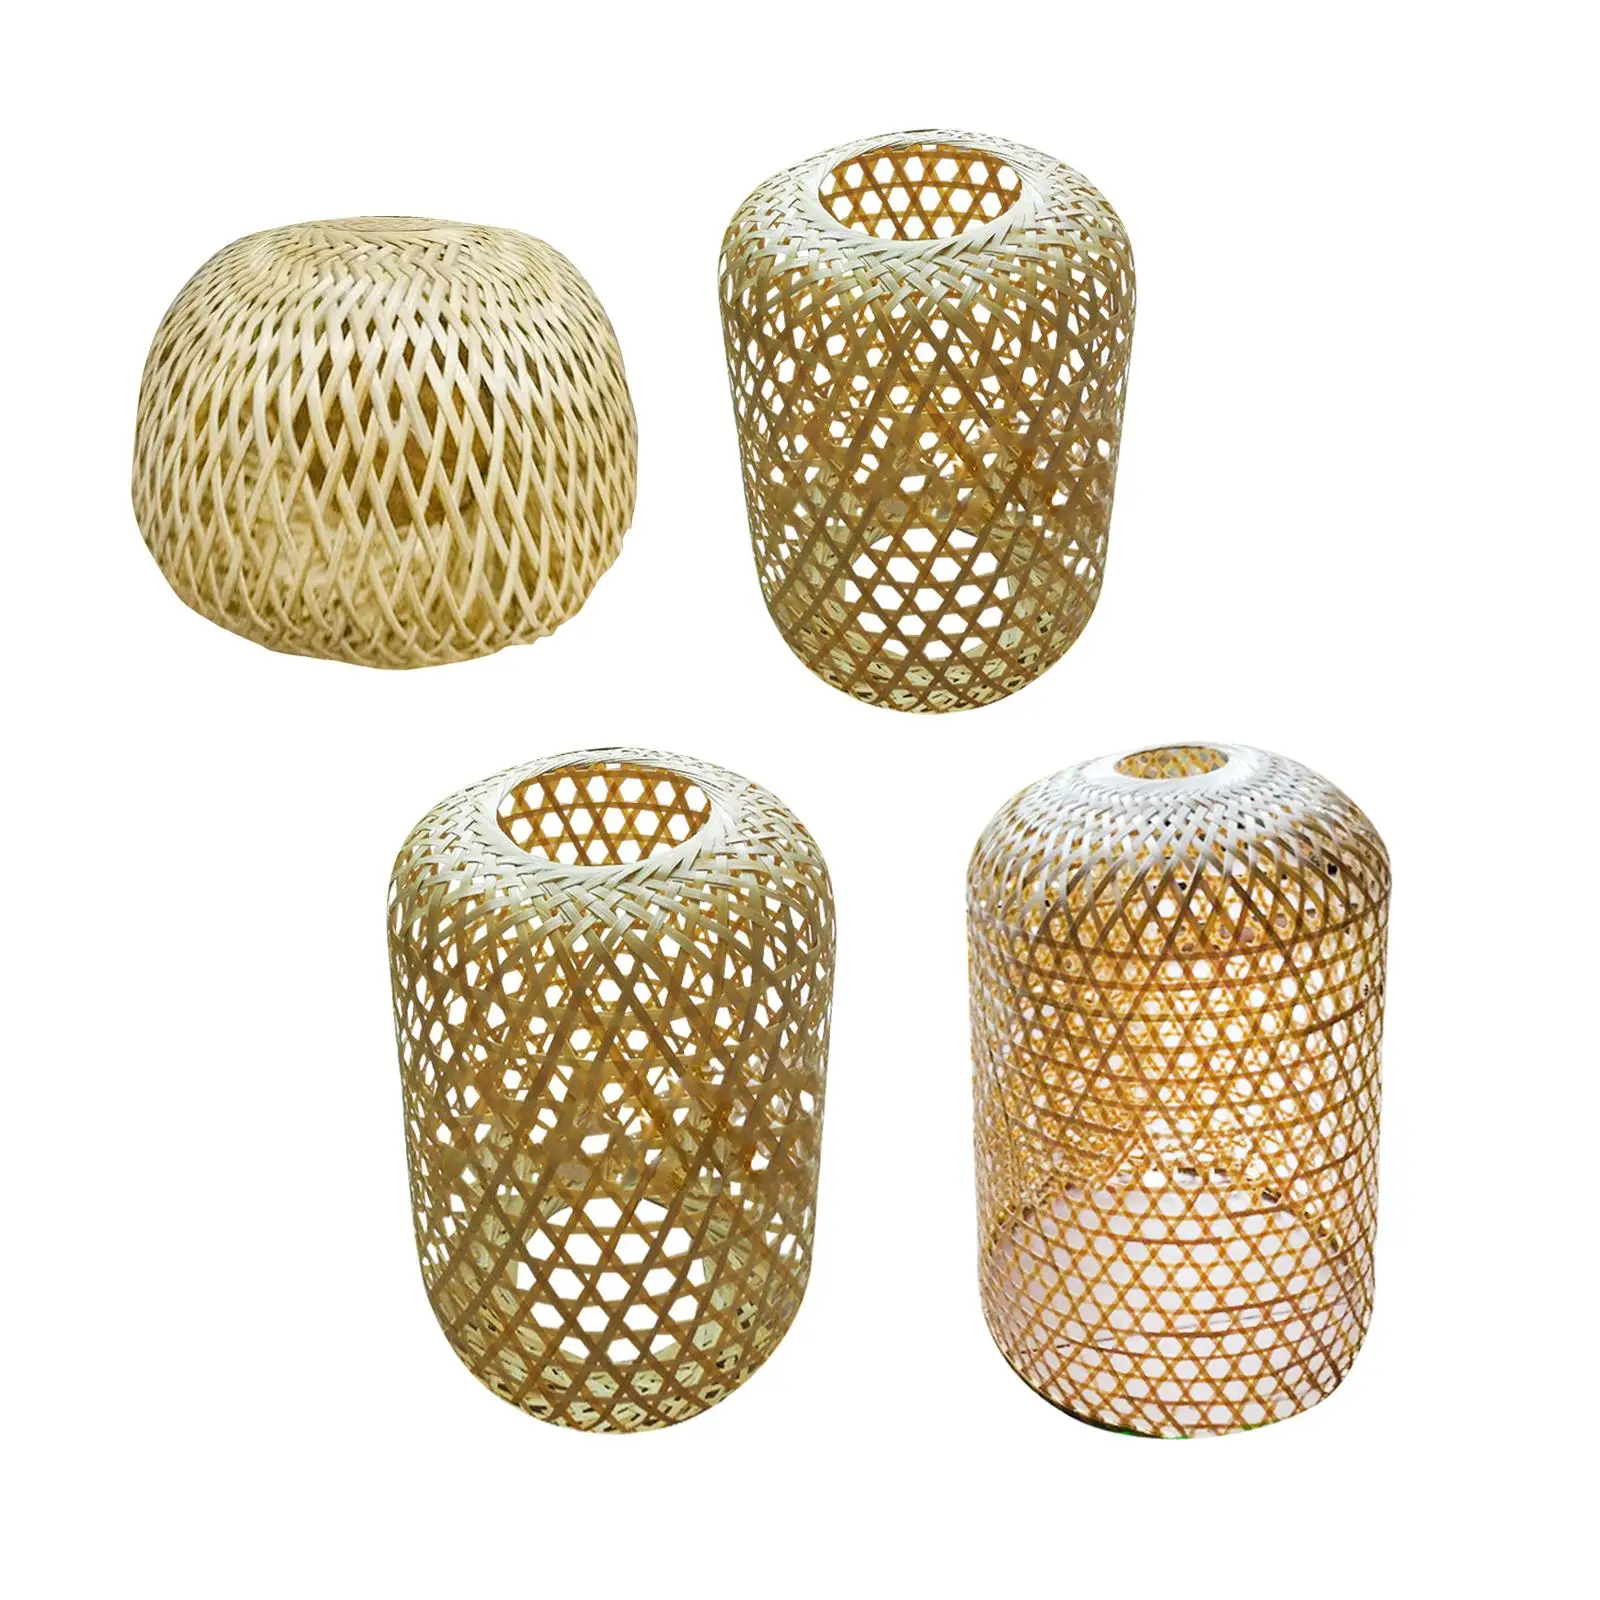 Bamboo Lamp Shade Decorative Art Crafts Hanging Lampshade for Living Room Bedroom